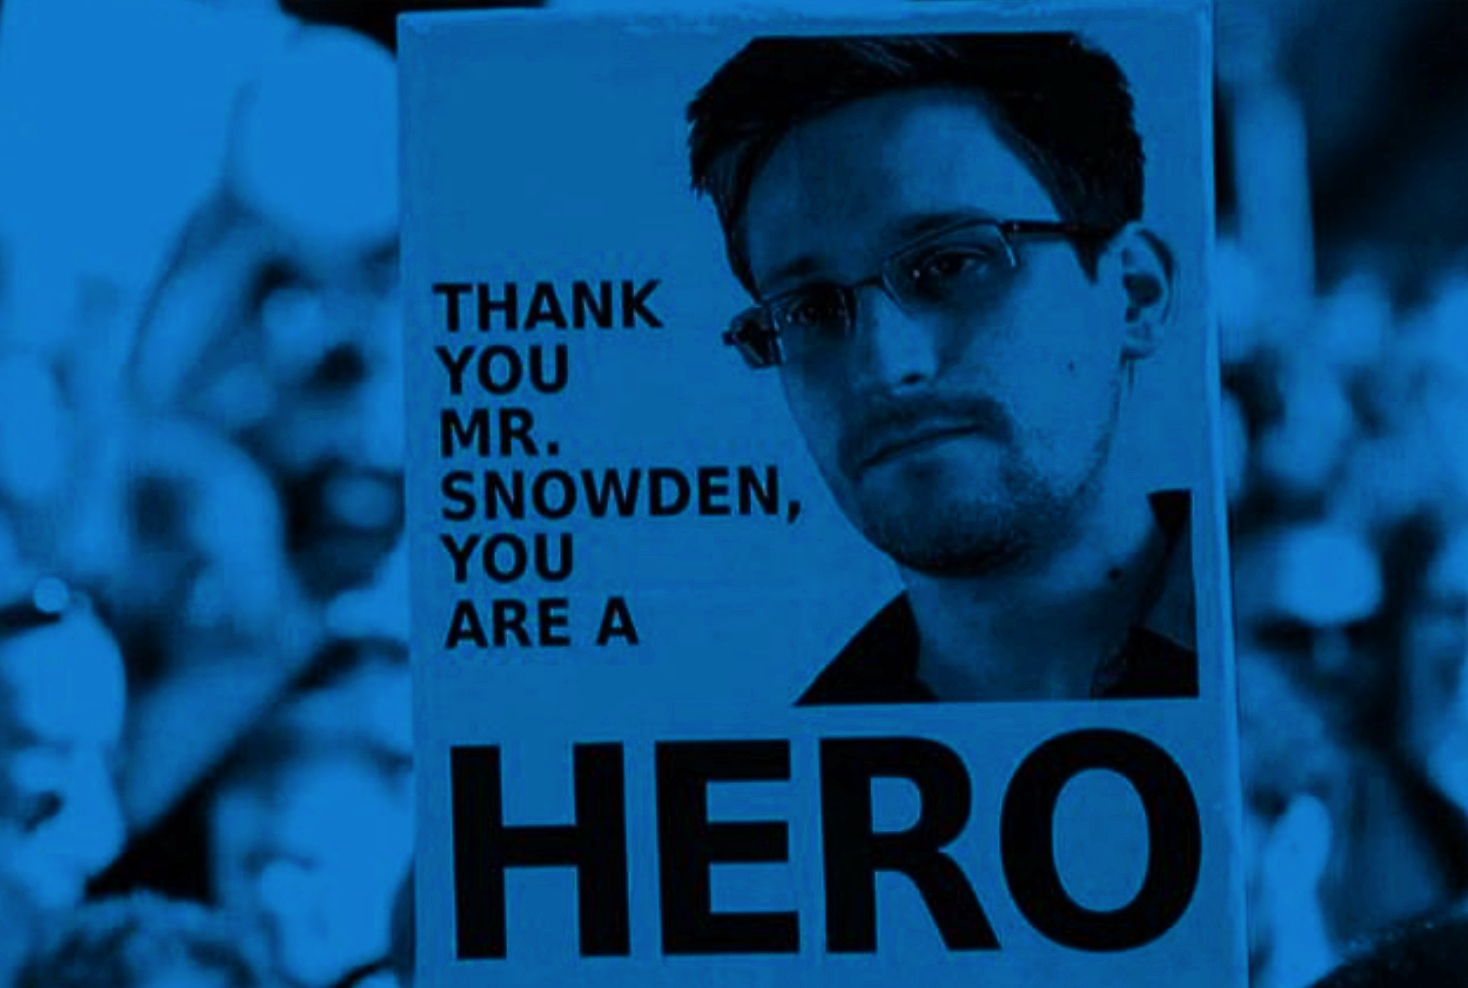 Edward Snowden: Privacy hero or dangerous traitor? Some demonstrators hold thank you signs while others believe he is a traitor.